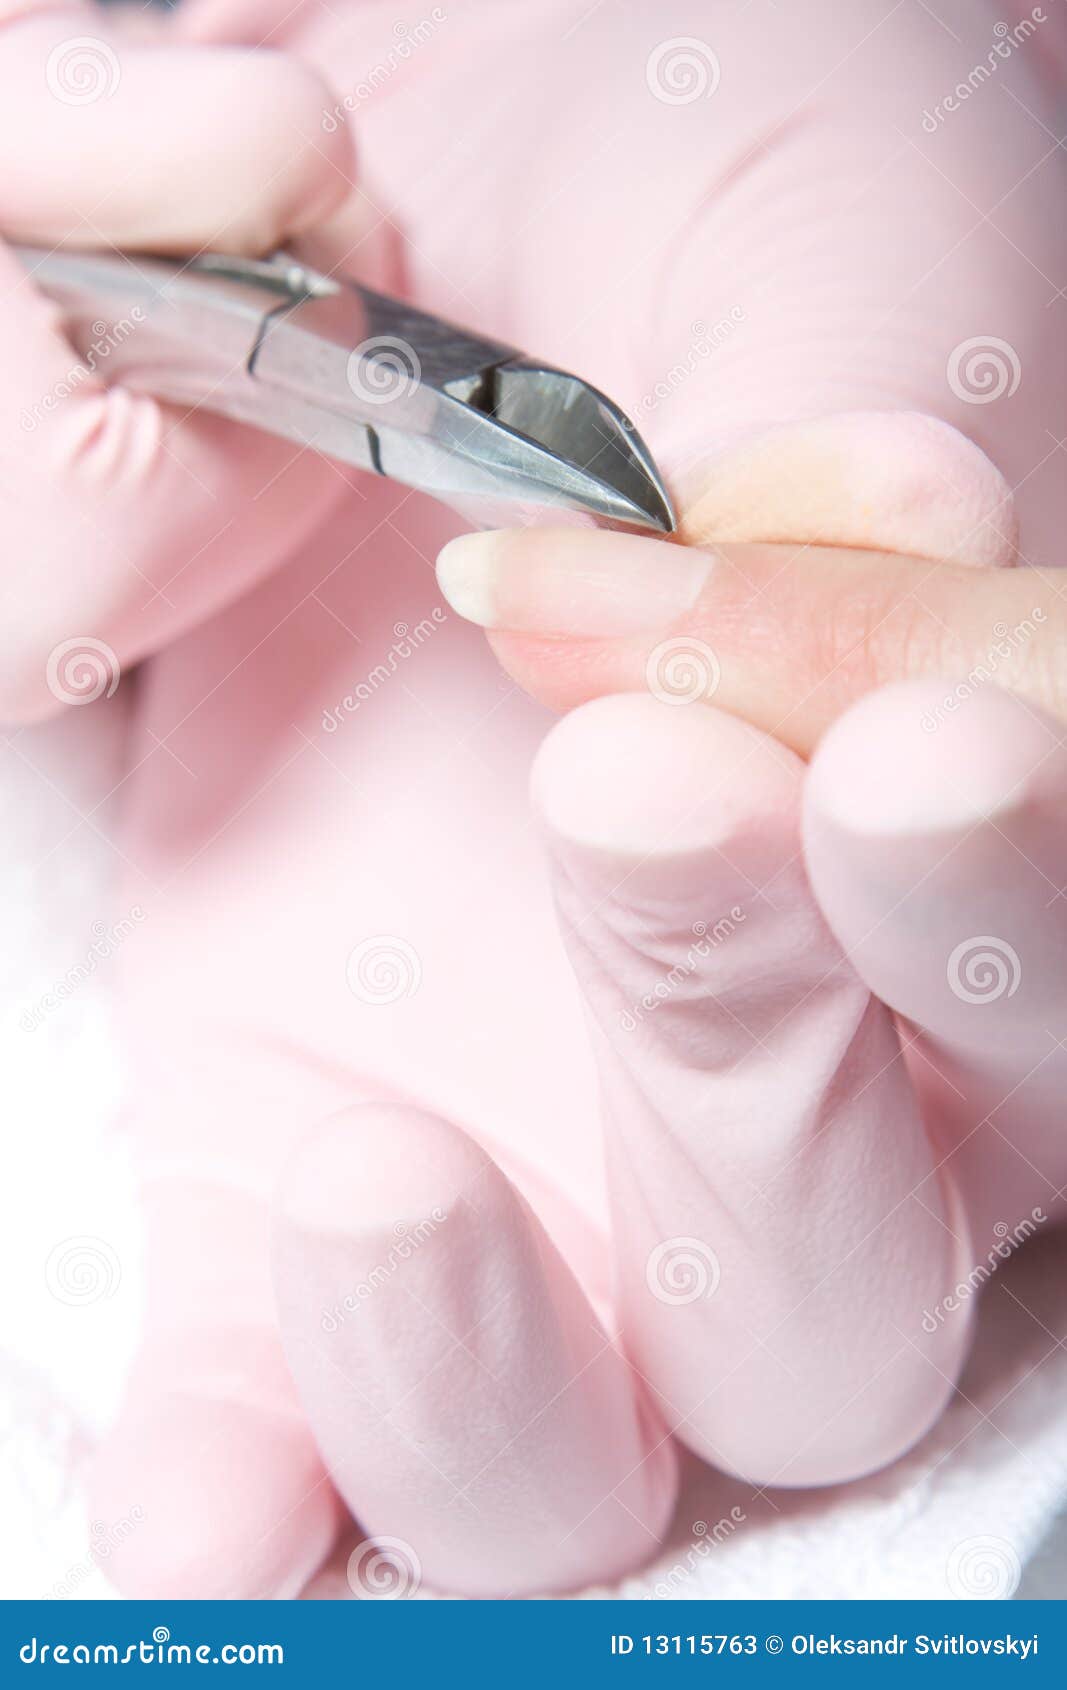 removing cuticle from the nail